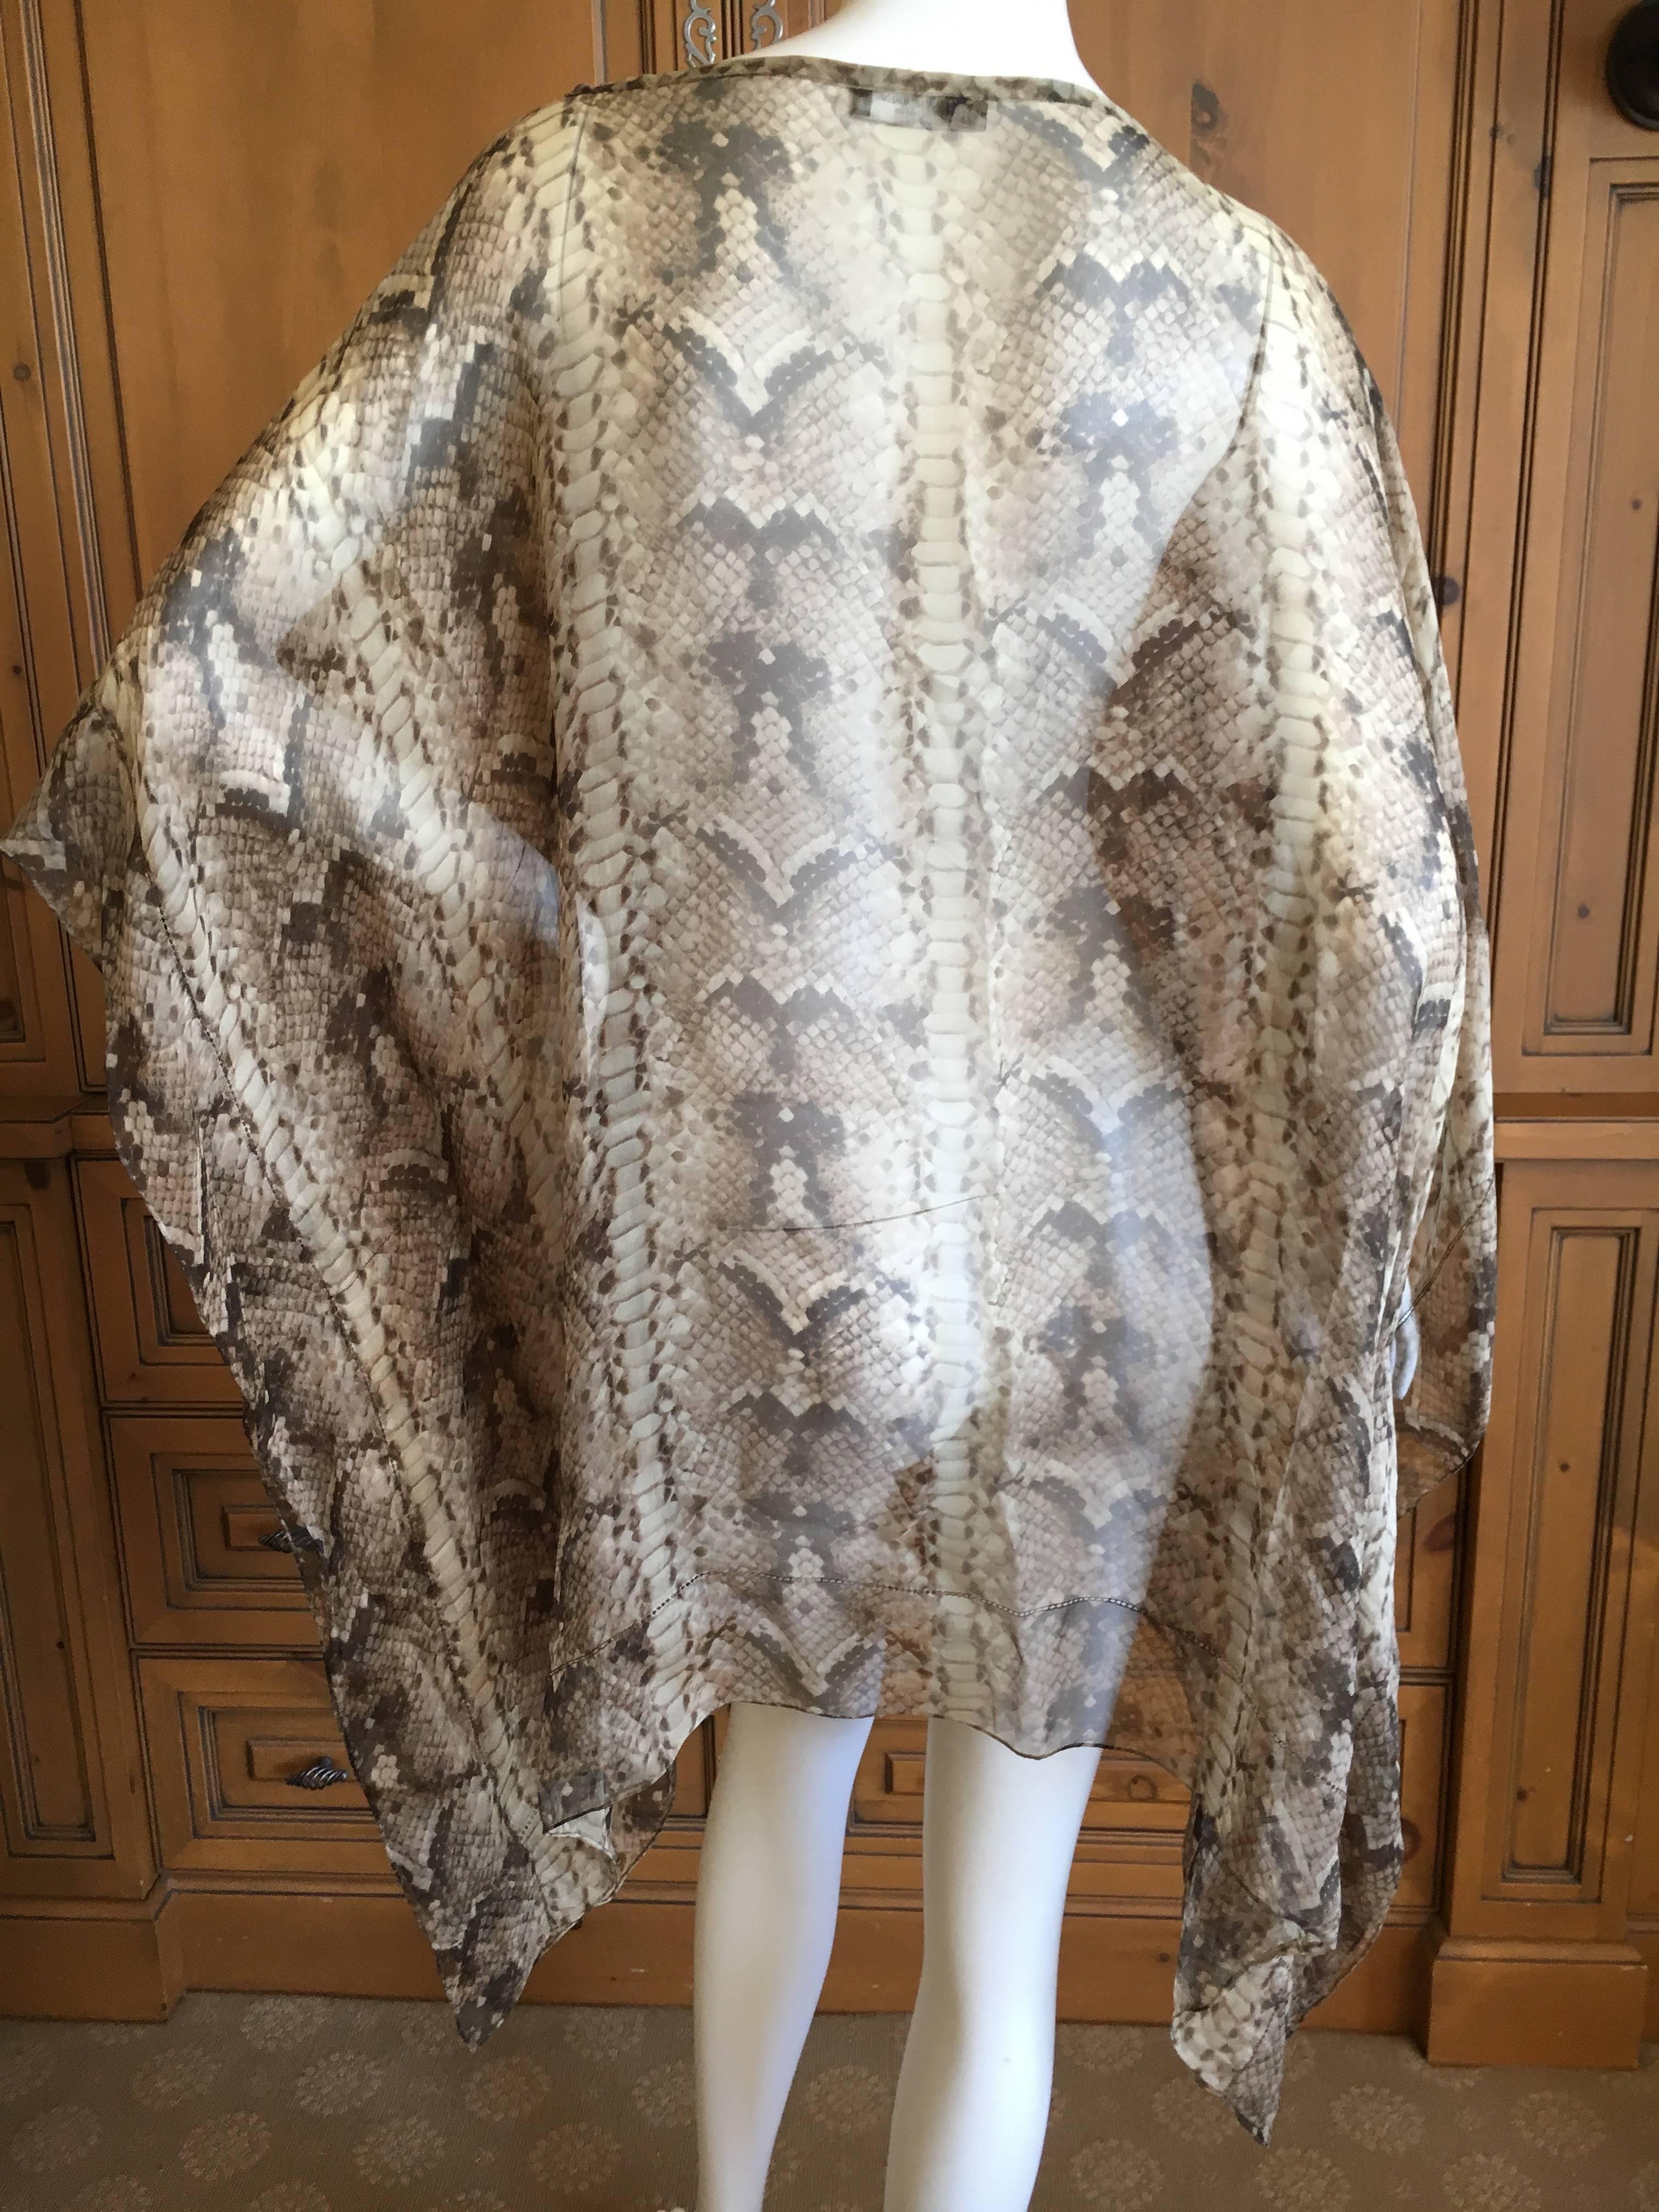 Yves Saint Laurent by Tom Ford Mombasa Collection Snake Print Silk Beach Cover/Poncho.